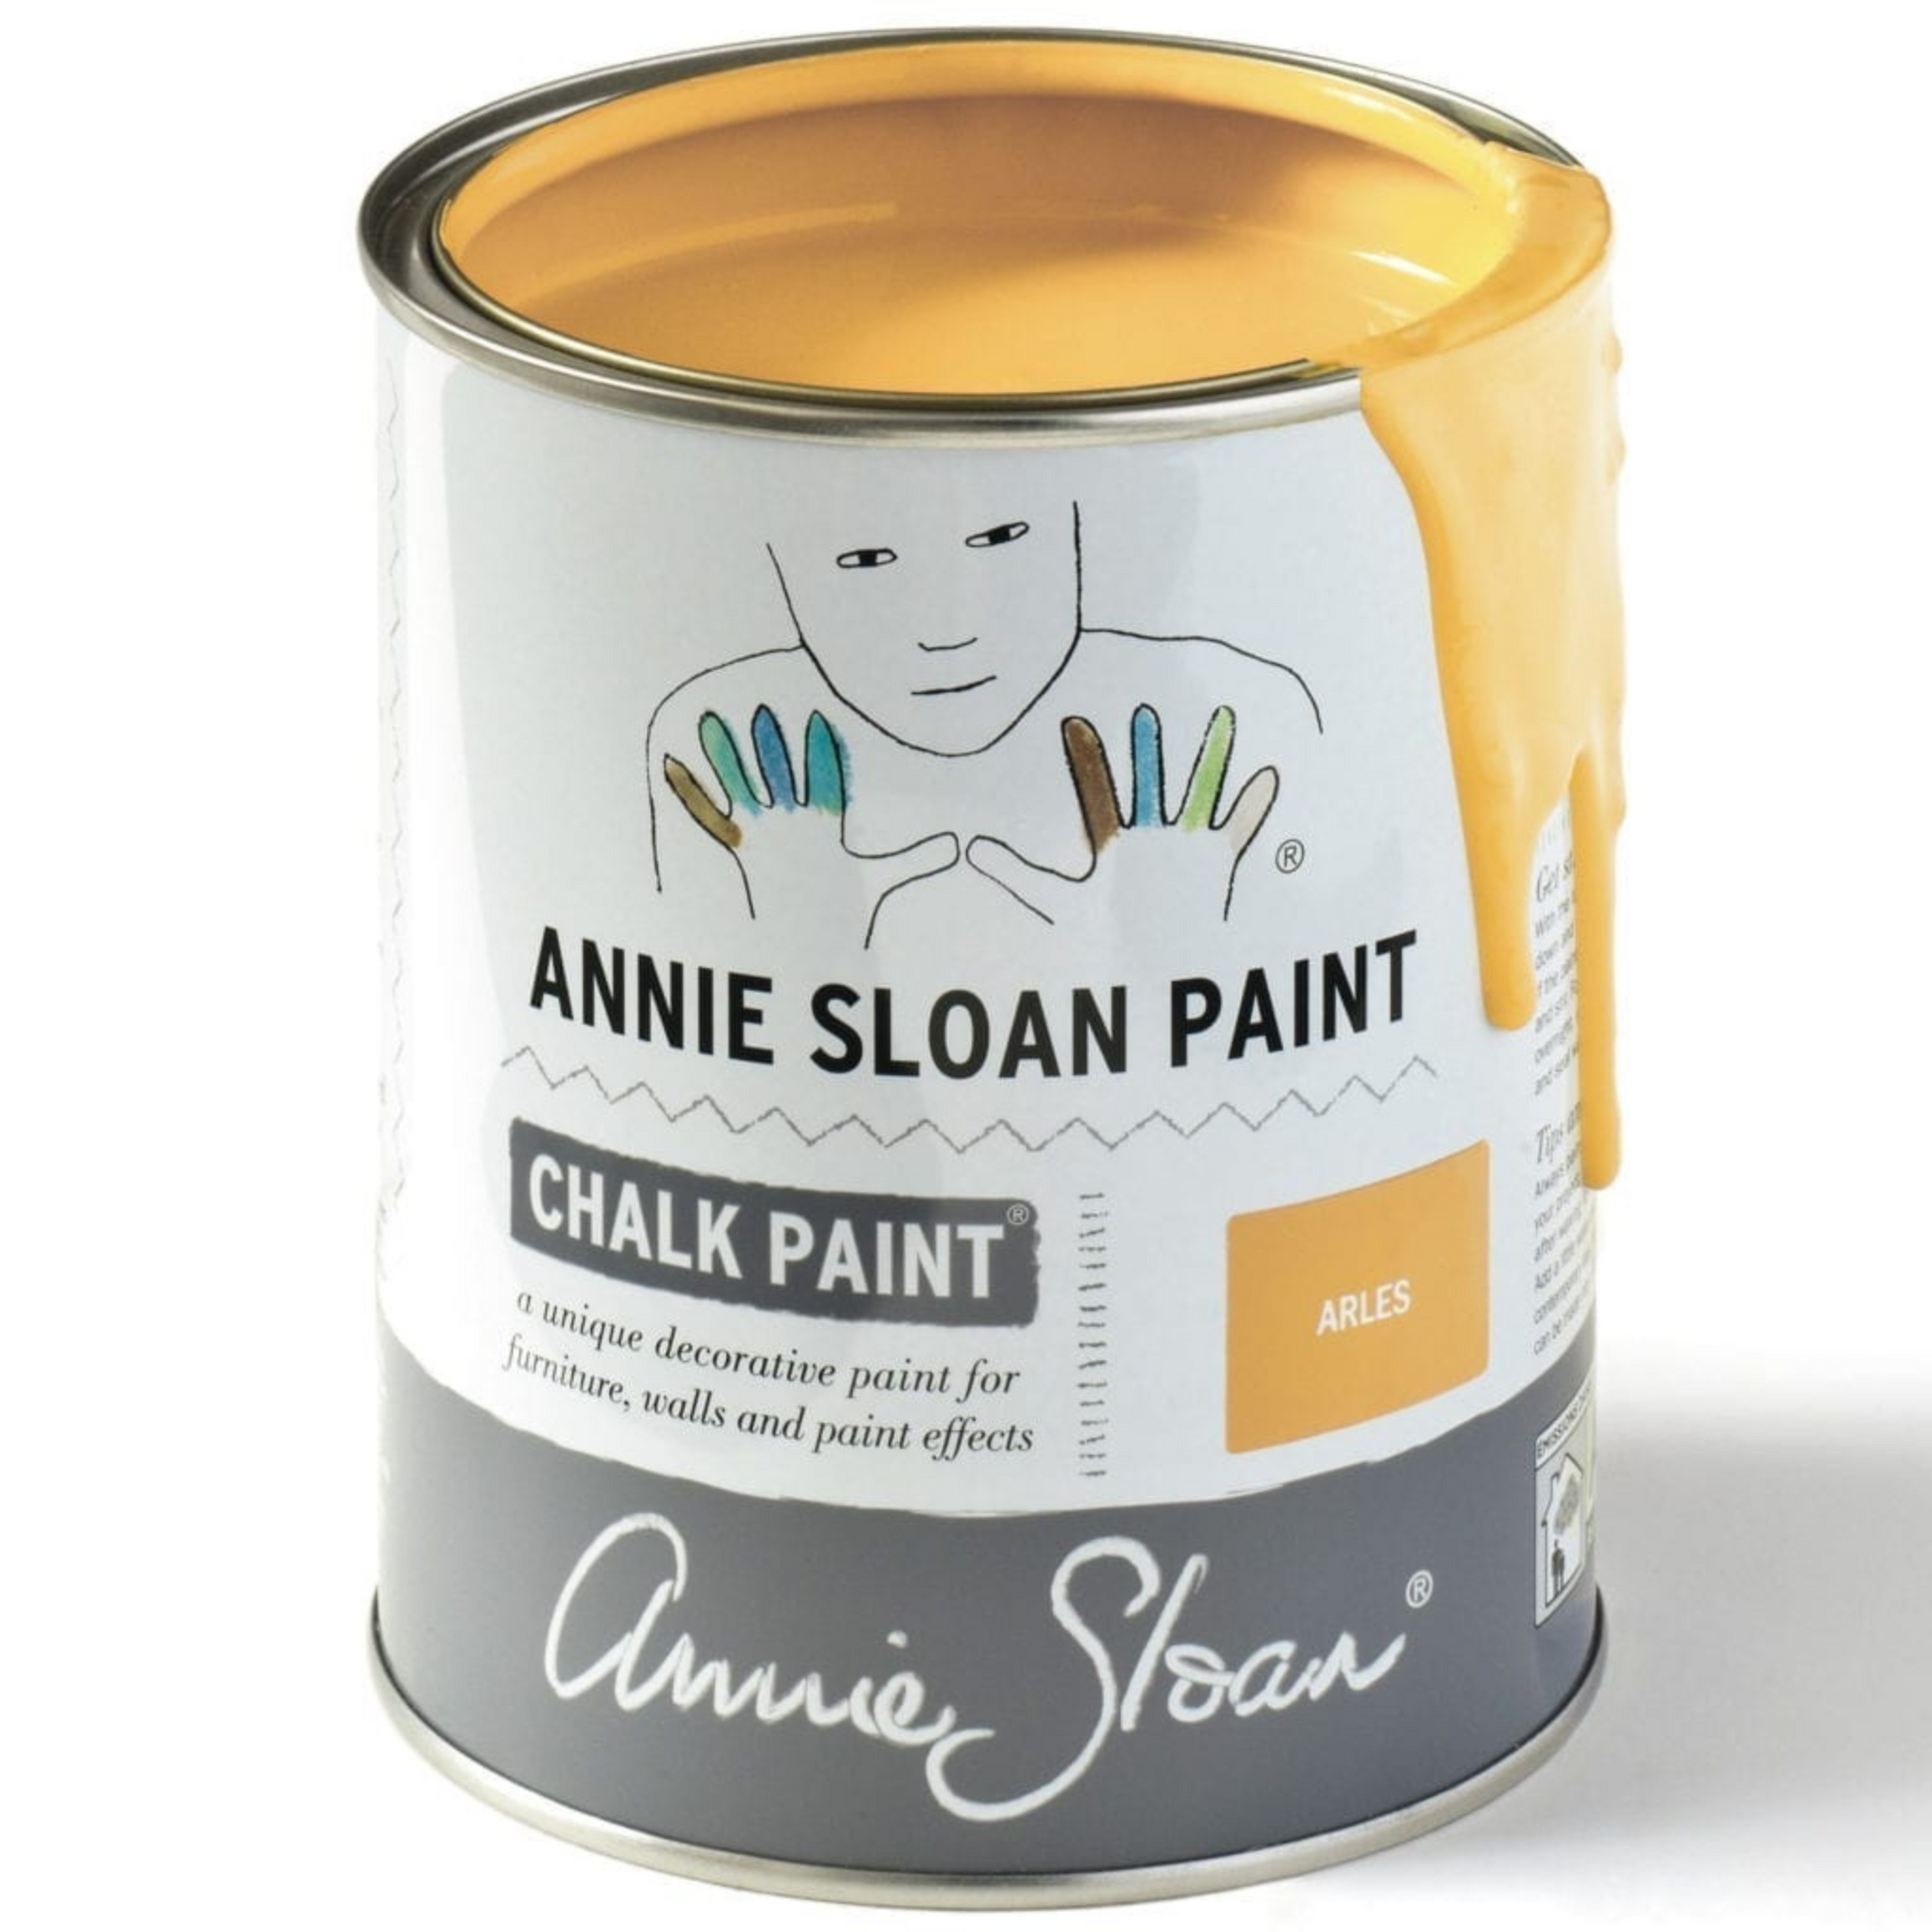 Can of arles annie sloan chalk paint.